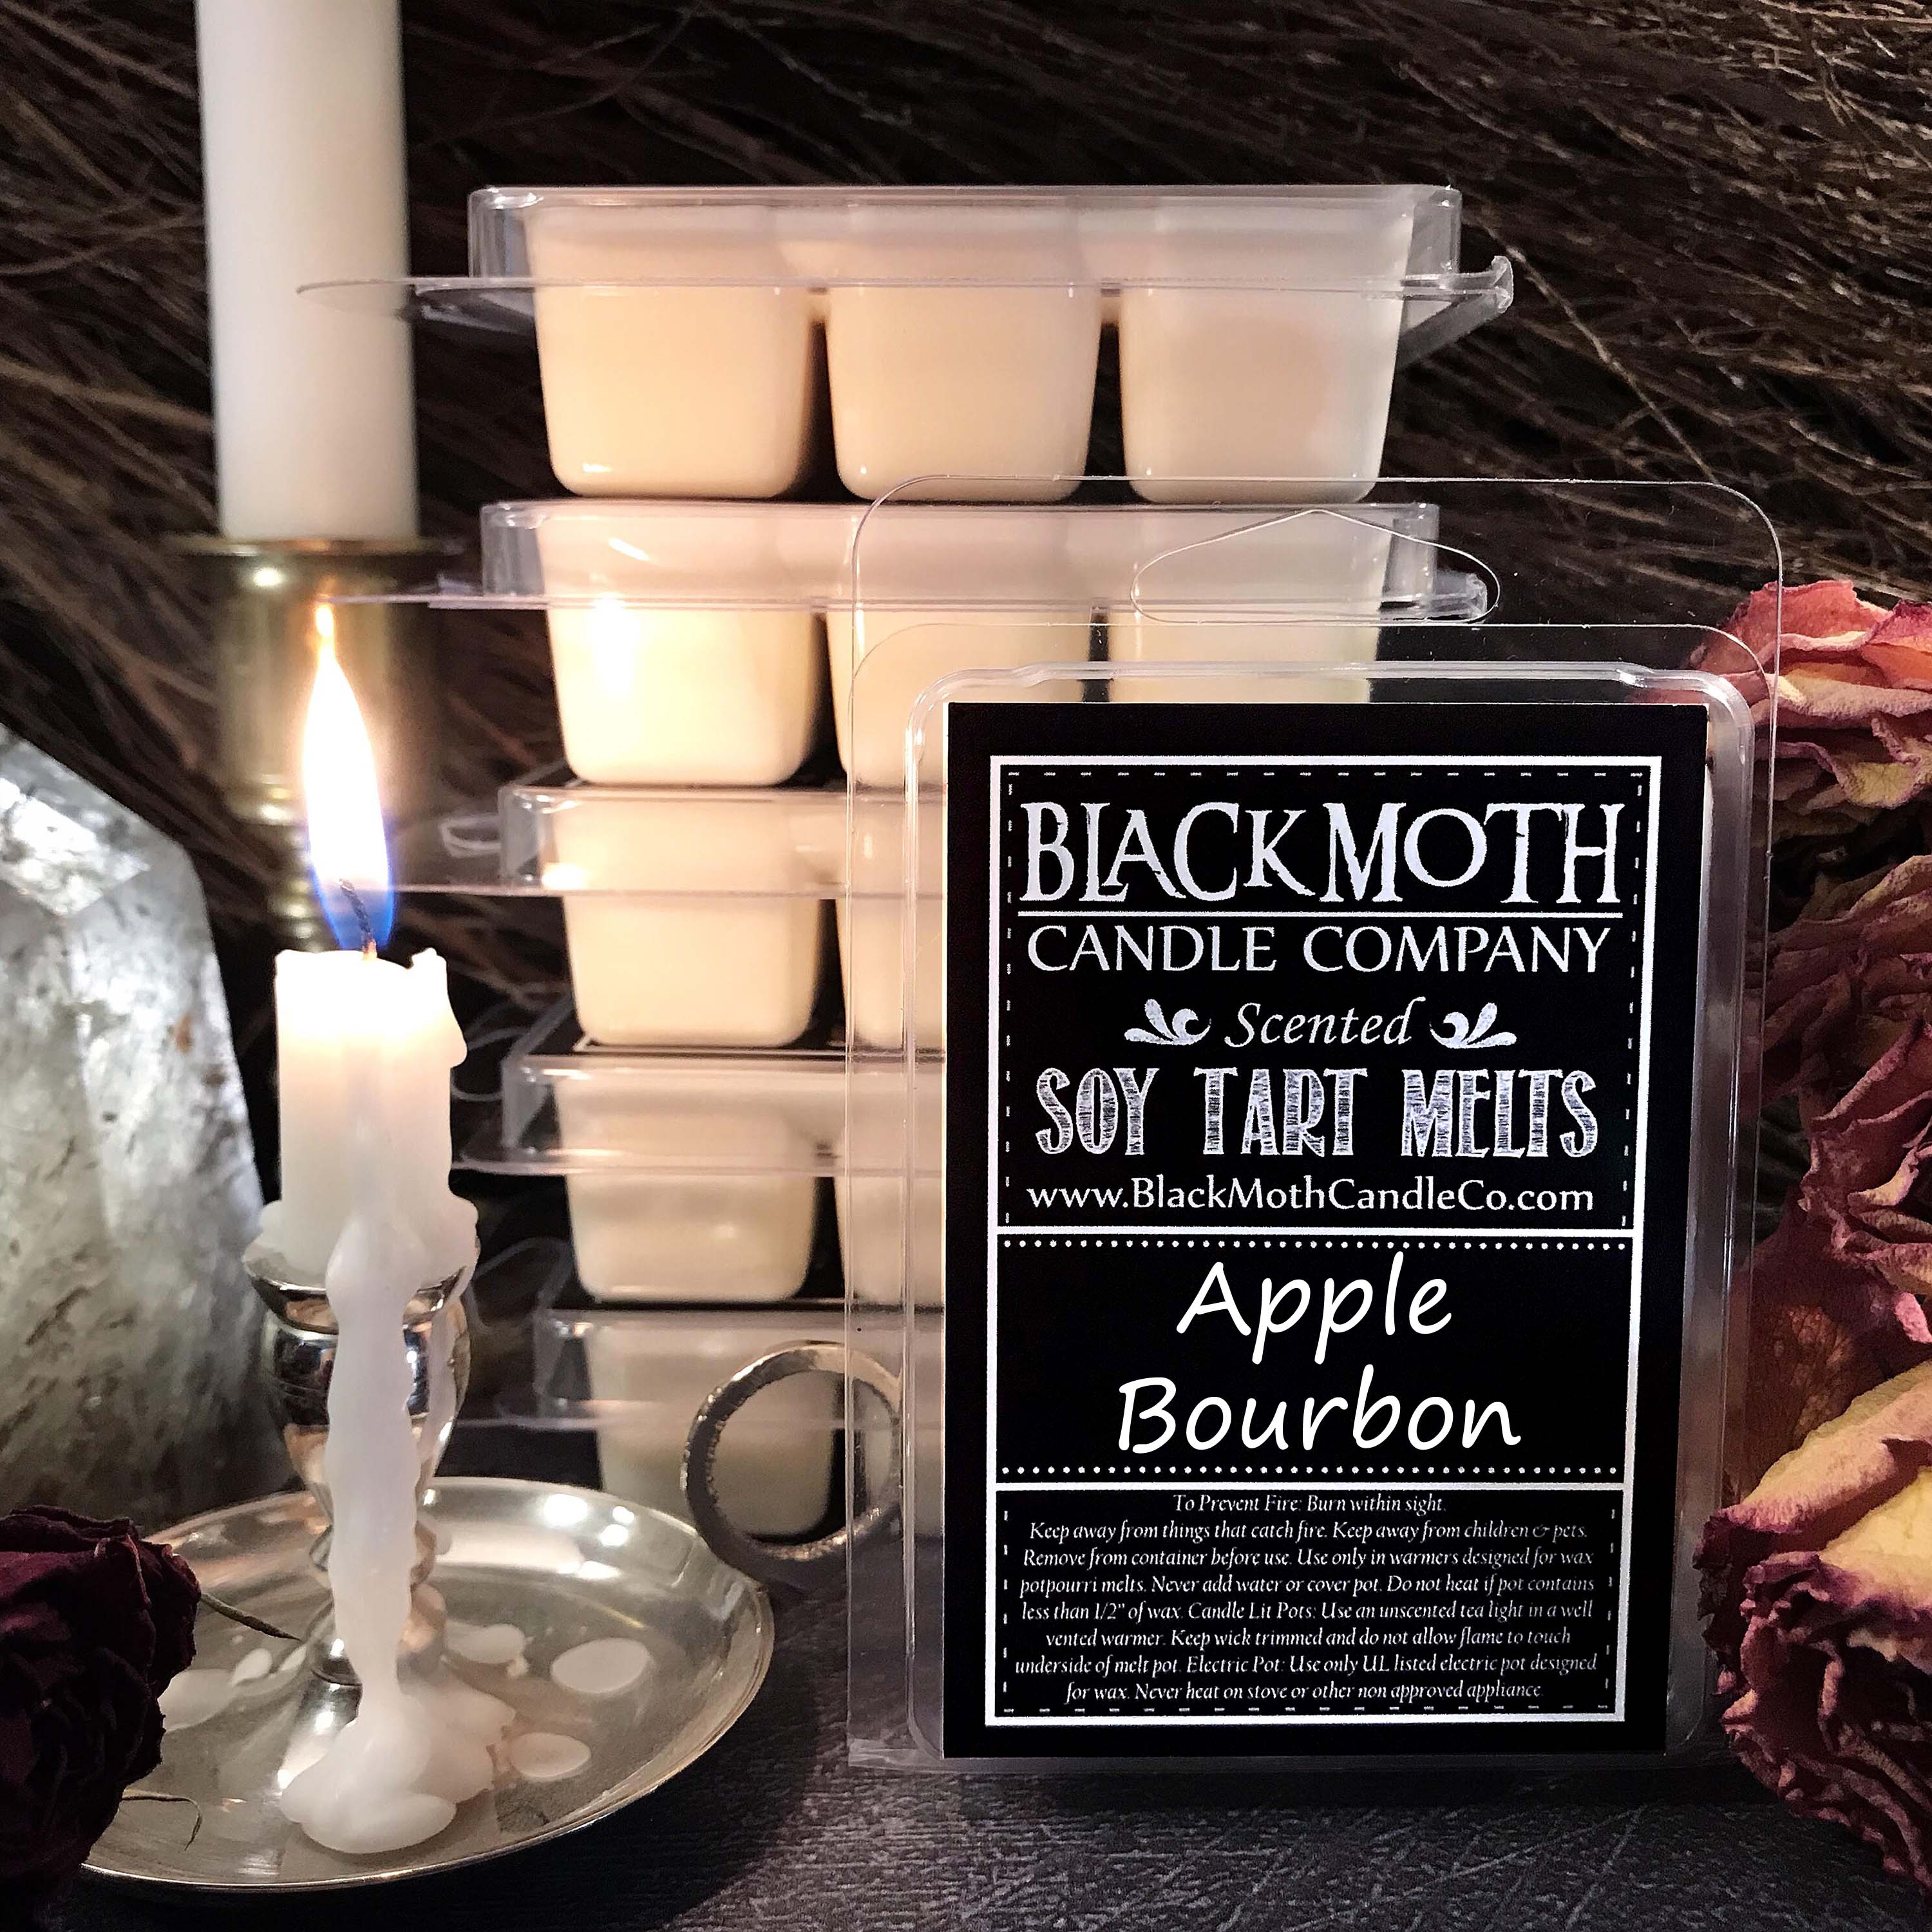 Apple Bourbon Scented Soy Wax Melts